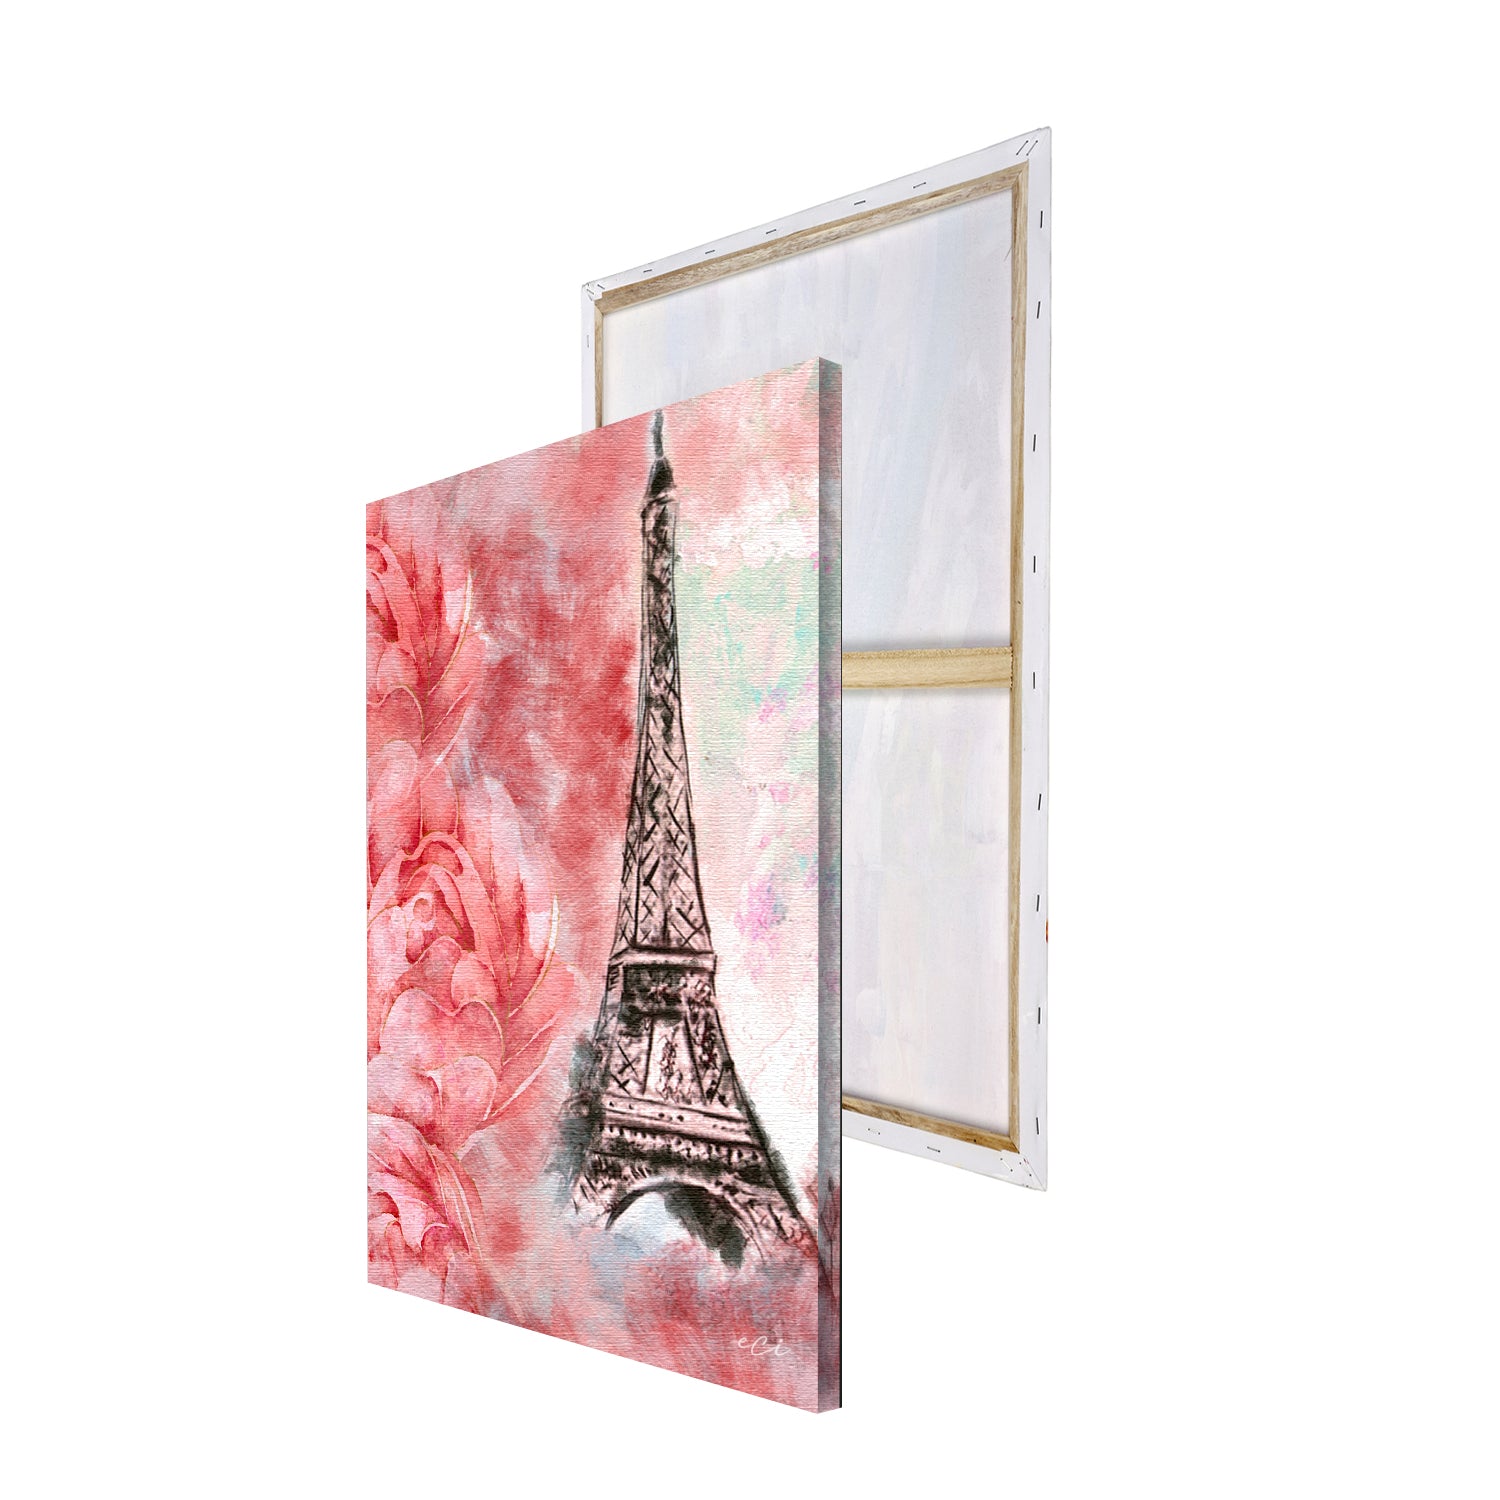 Eiffel Tower With Rose Flowers Painting Digital Printed Canvas Wall Art 4